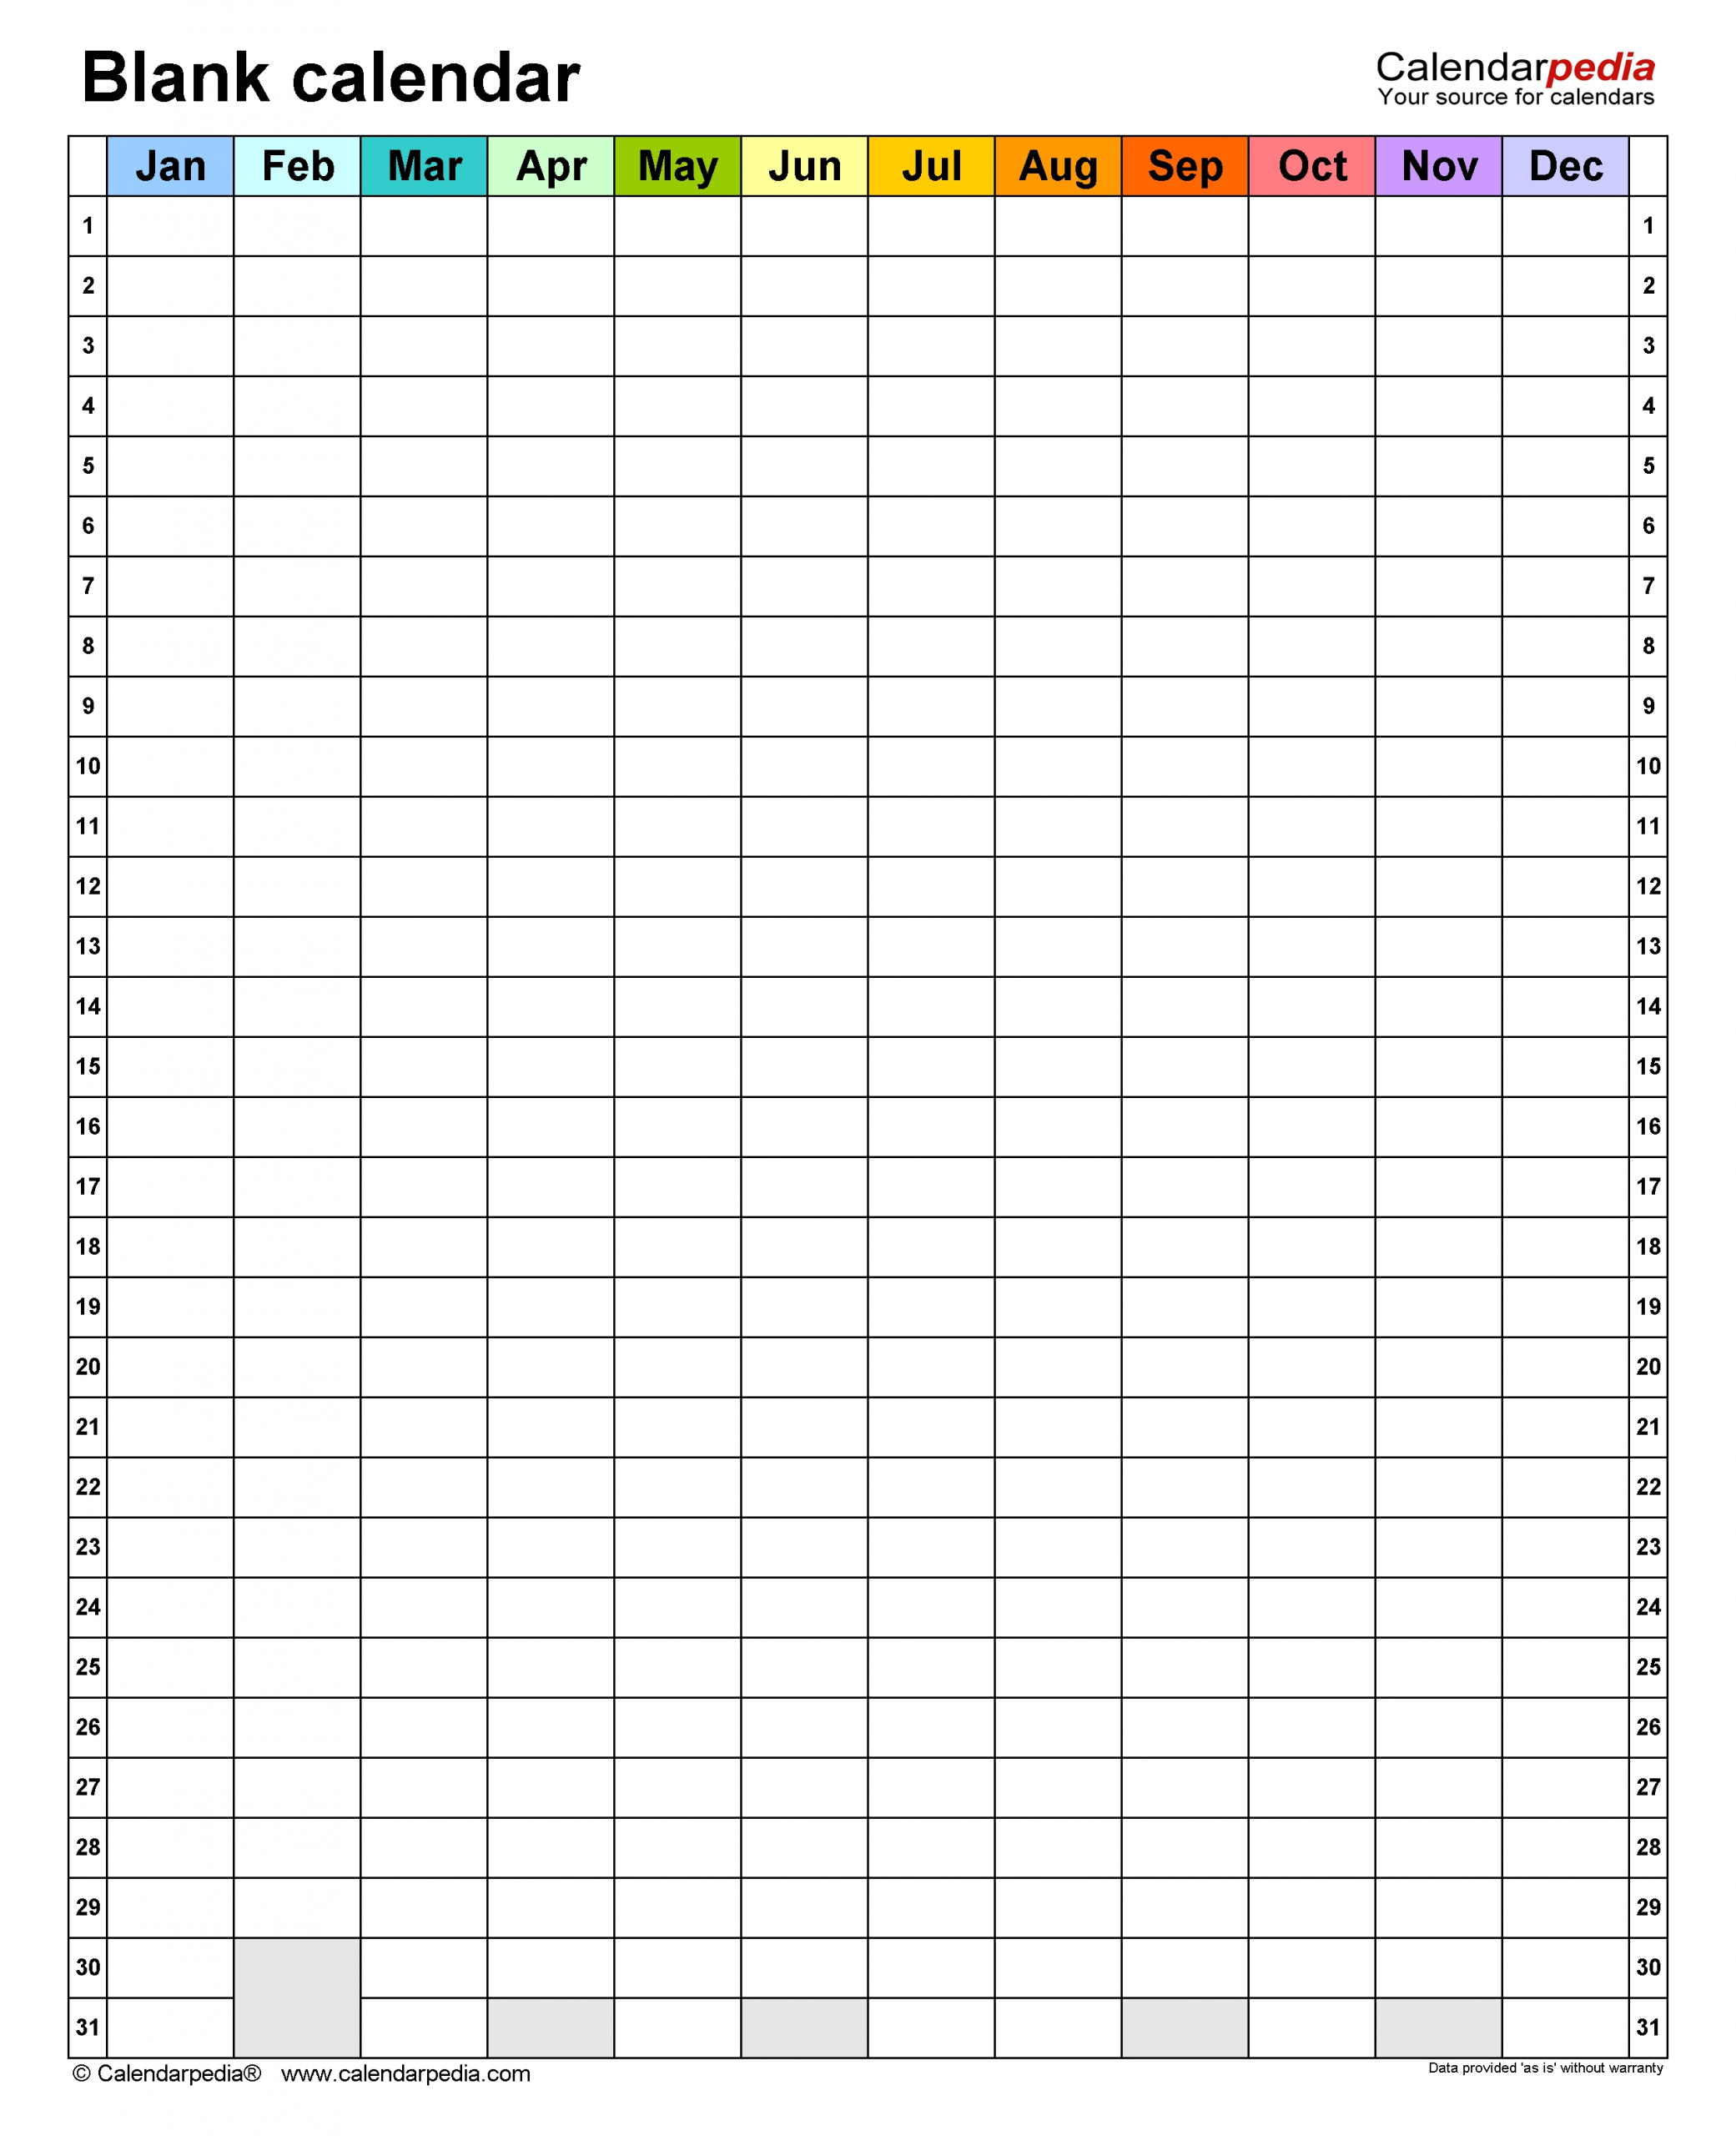 Blank Calendars - Free Printable Microsoft Word Templates with Blank Calendars With Days Of The Week Not Numbered